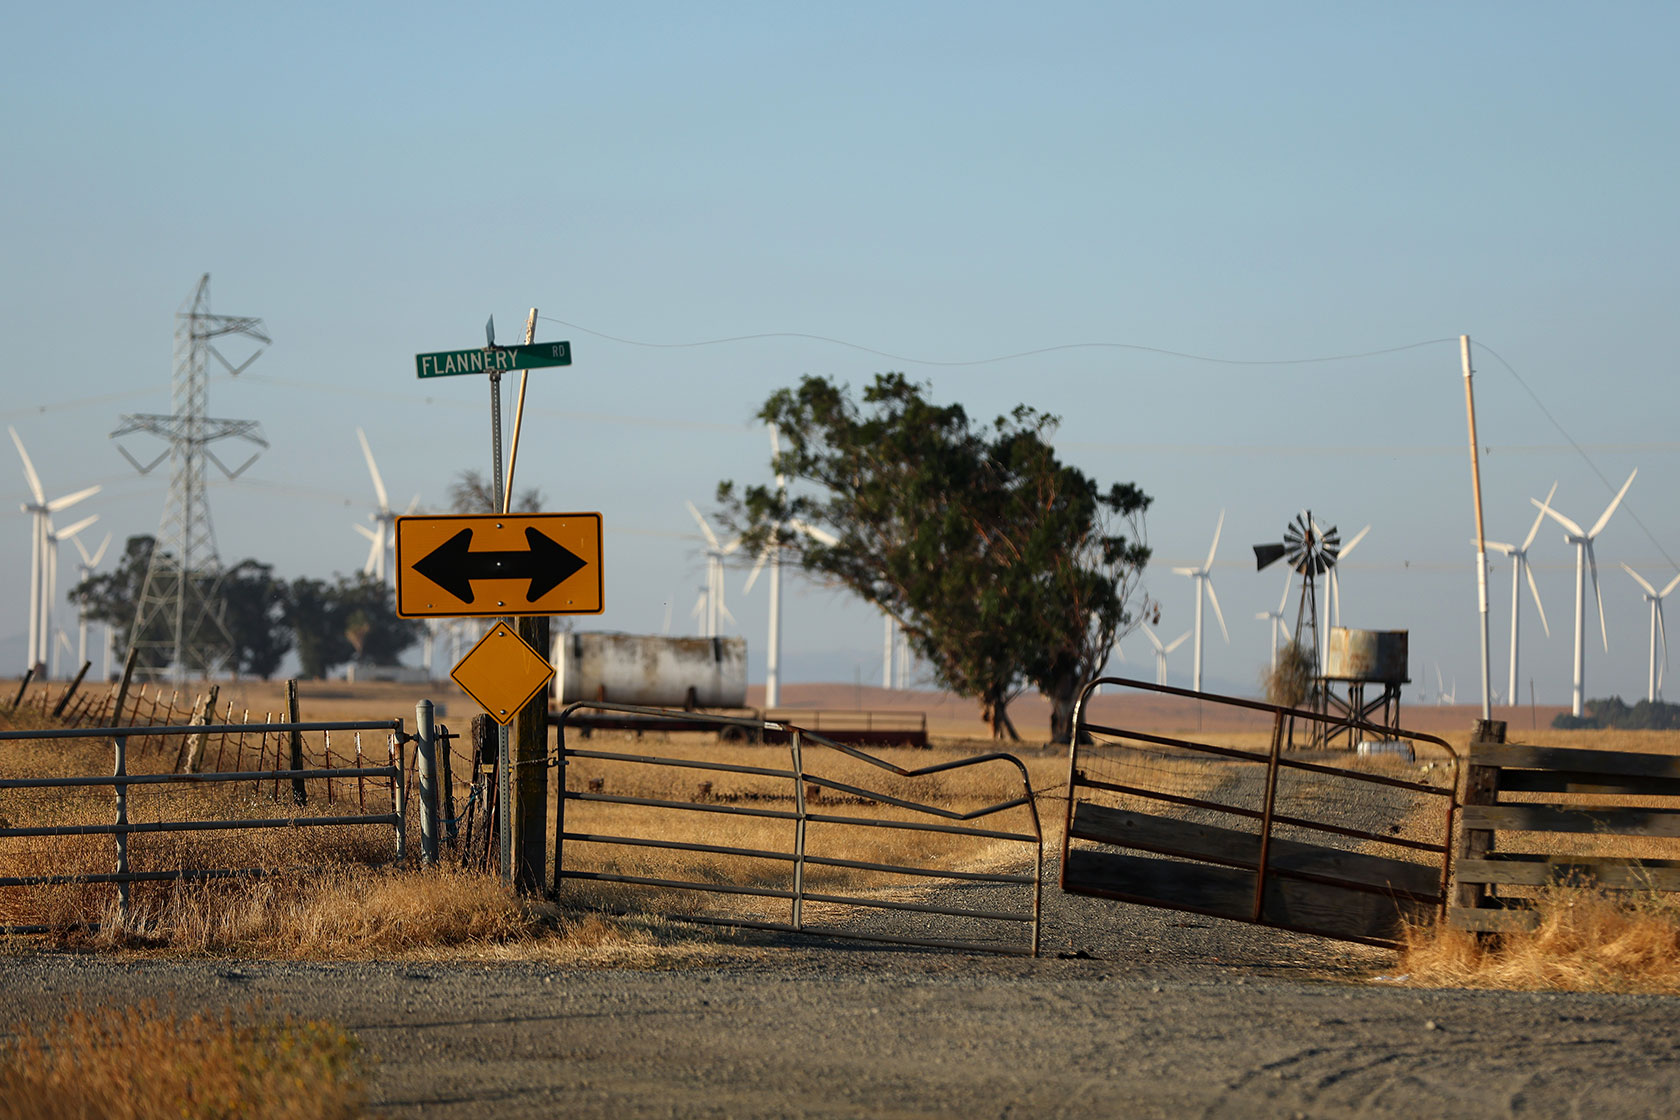 Photo shows a street sign in front of an open field with golden grass, a tree, and white wind turbines against a dusty blue sky